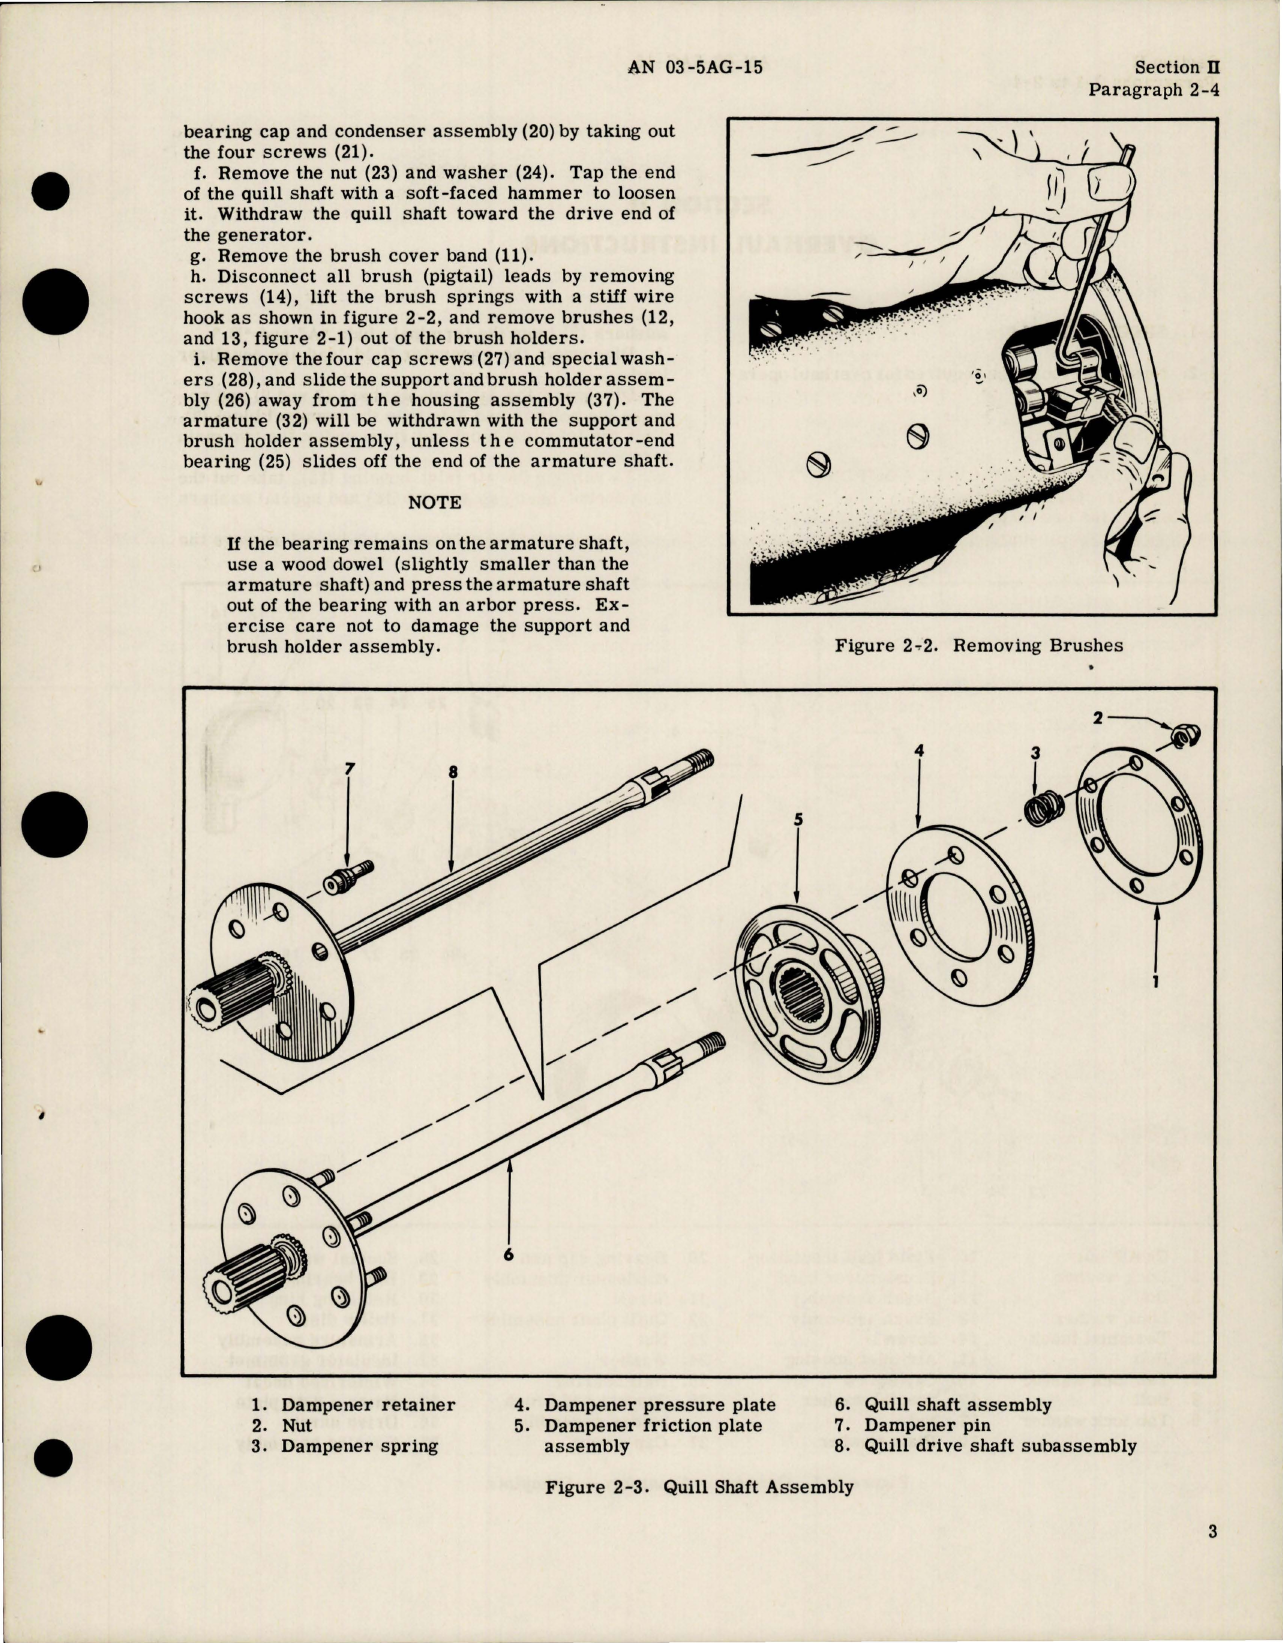 Sample page 7 from AirCorps Library document: Overhaul Instructions for Generator - Model G35-2 